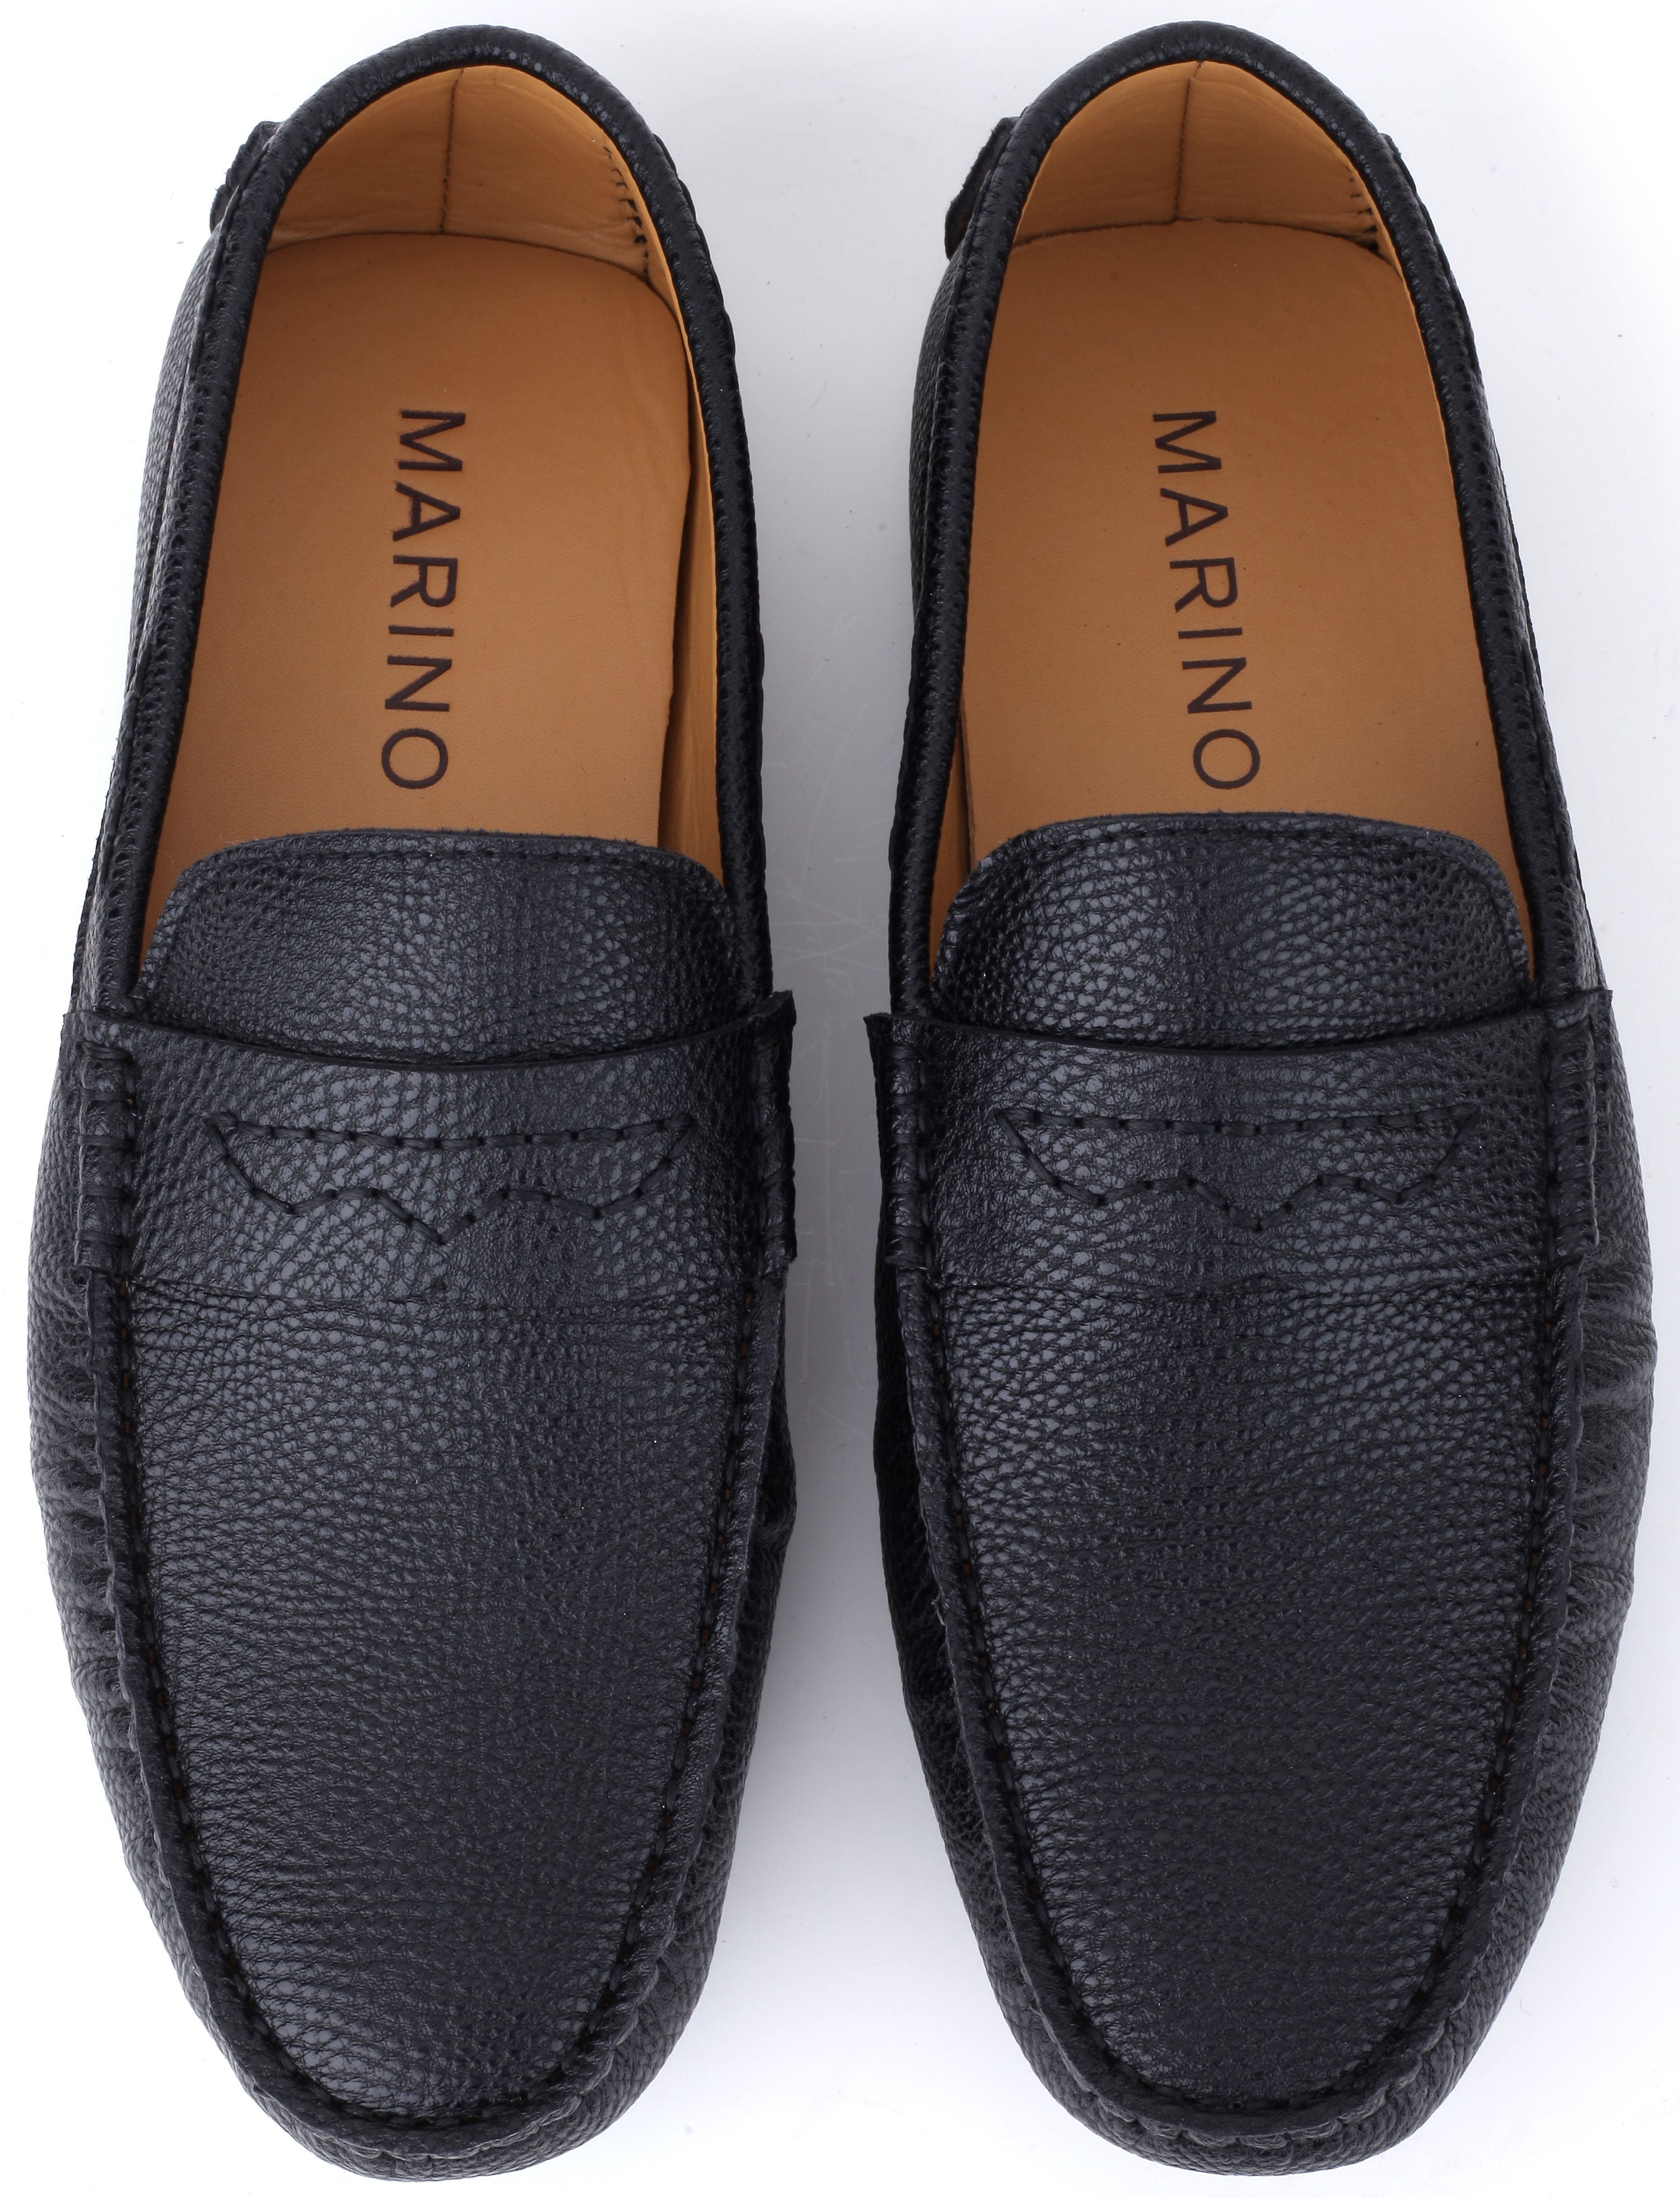 Wordt erger statisch noot Mio Marino Men's Casually Suave Leather Penny Loafers - Walmart.com